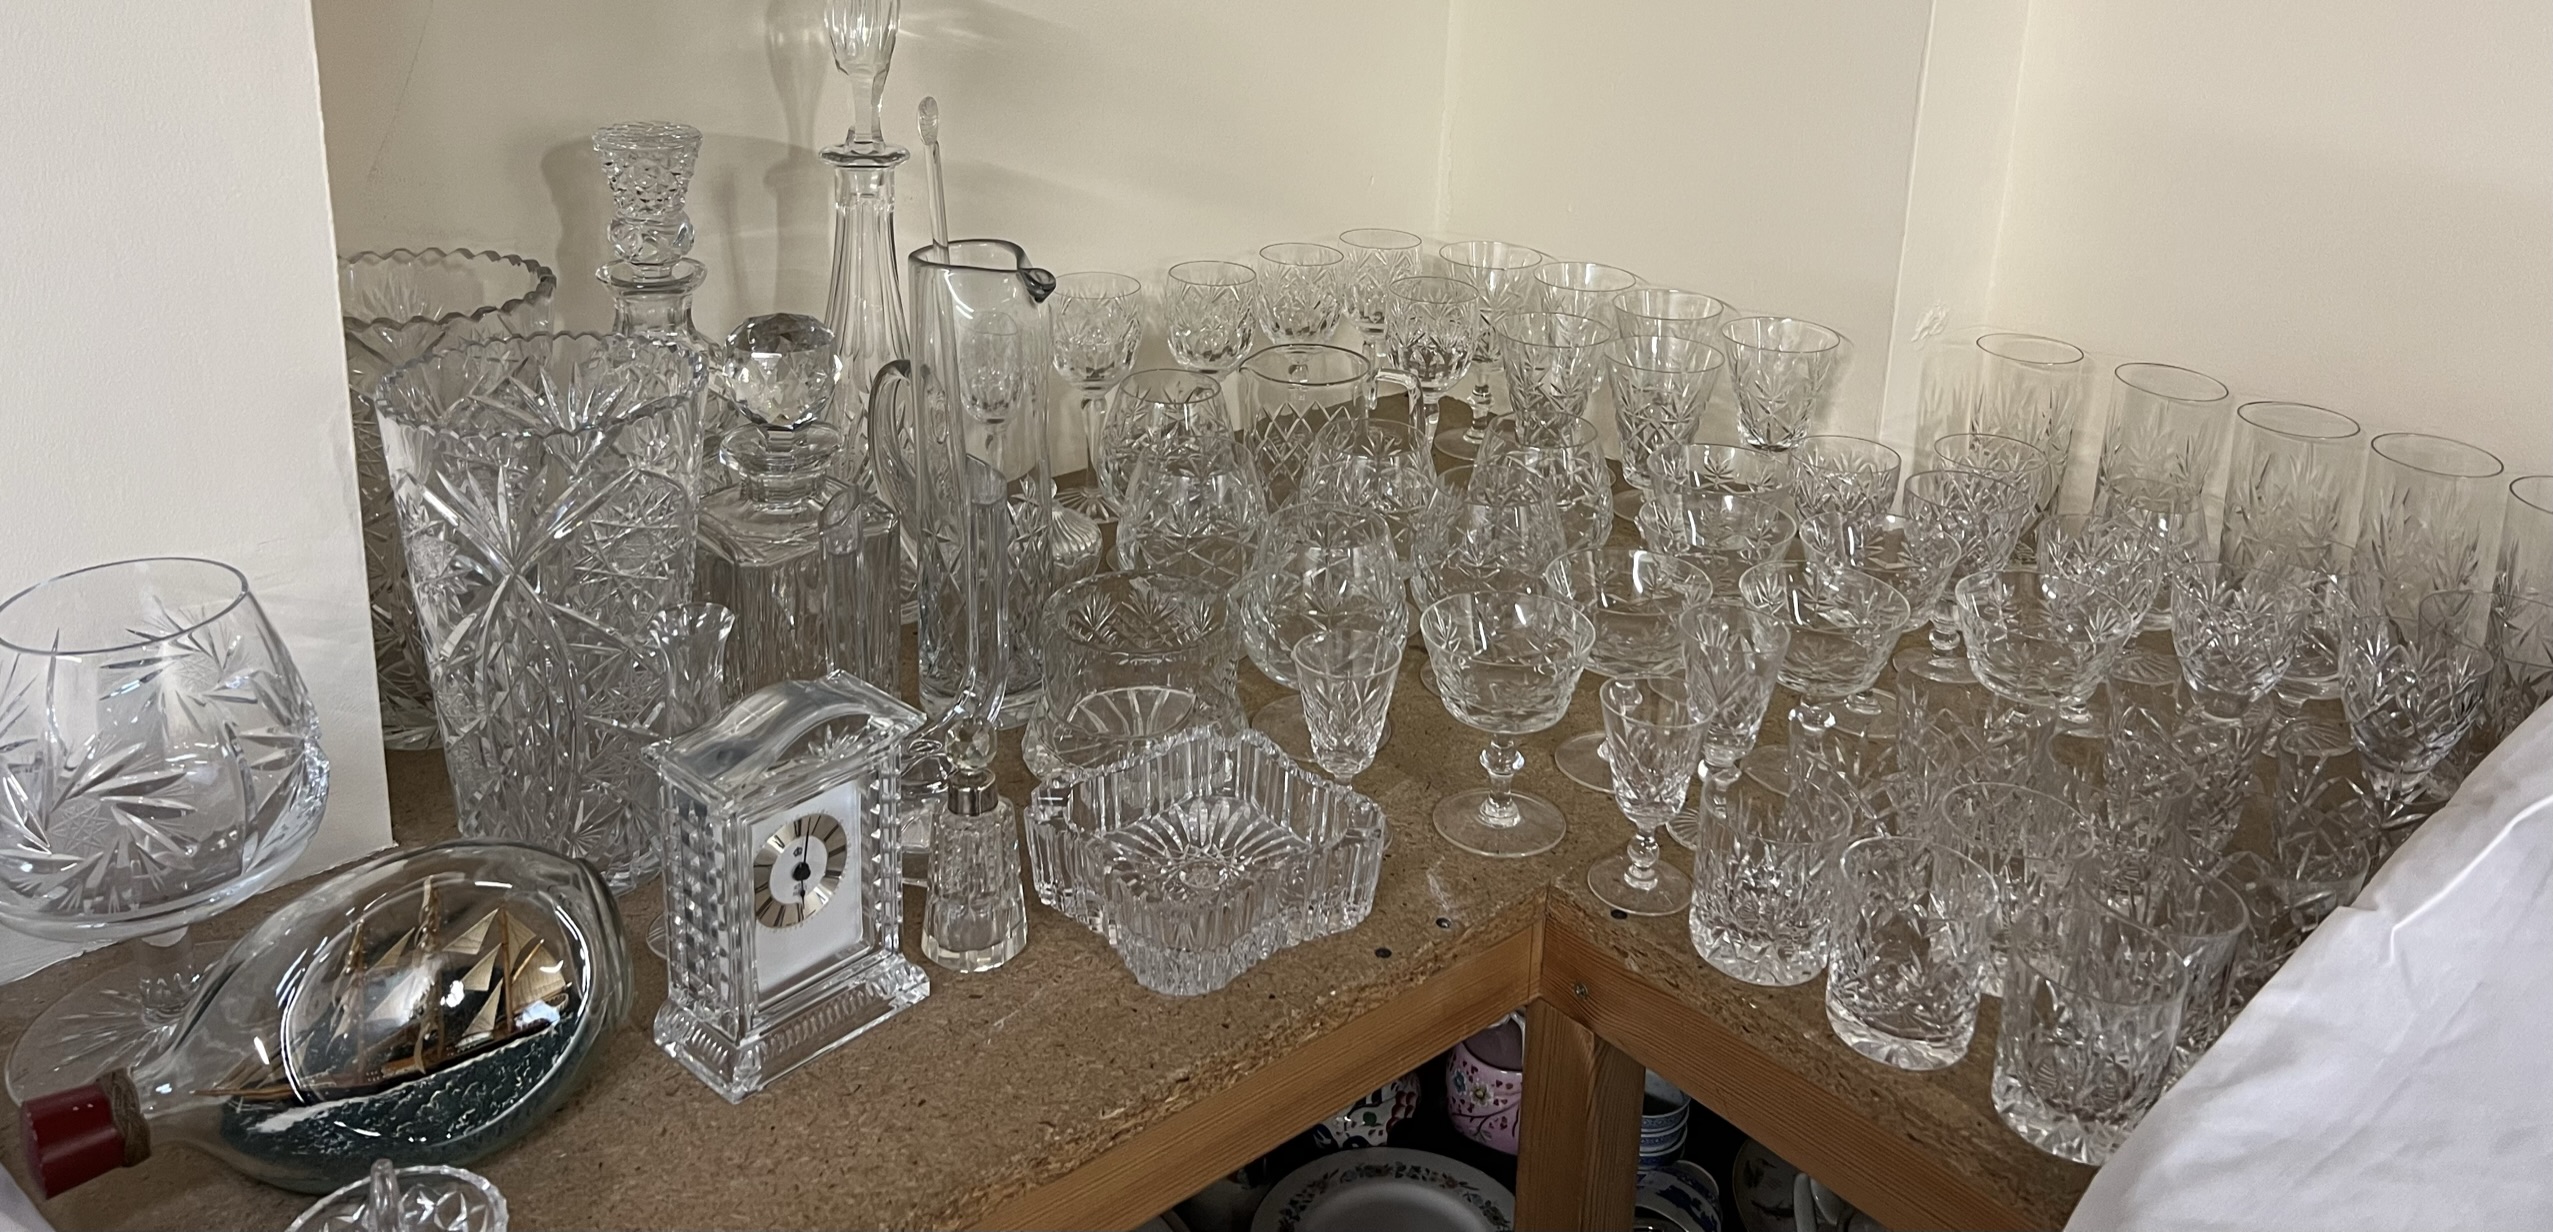 An extensive collection of crystal drinking glasses, crystal vases, decanters, desk clock,